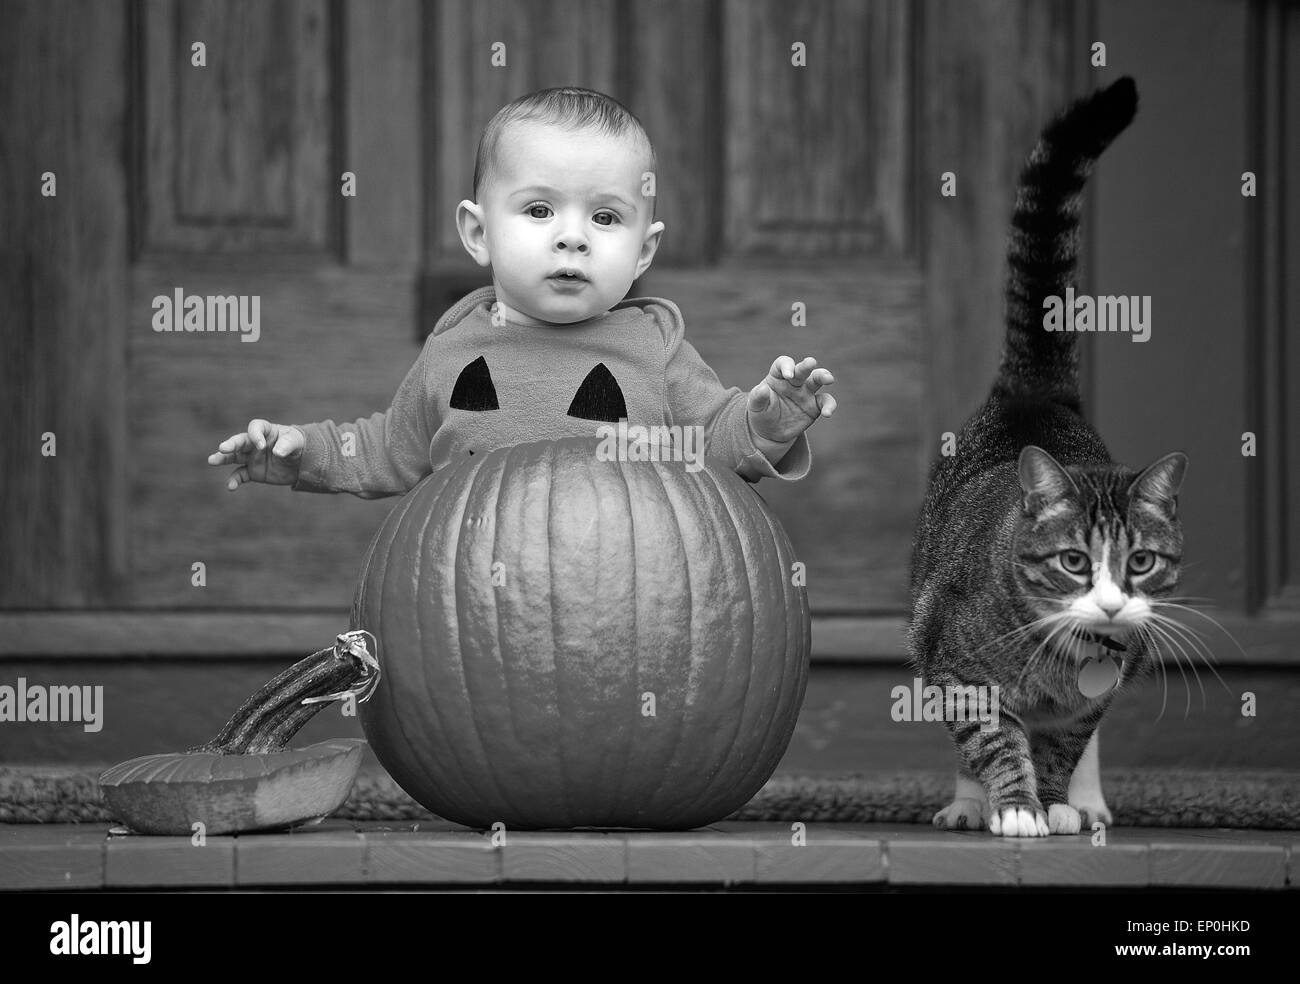 Baby in a pumpkin with cat Stock Photo